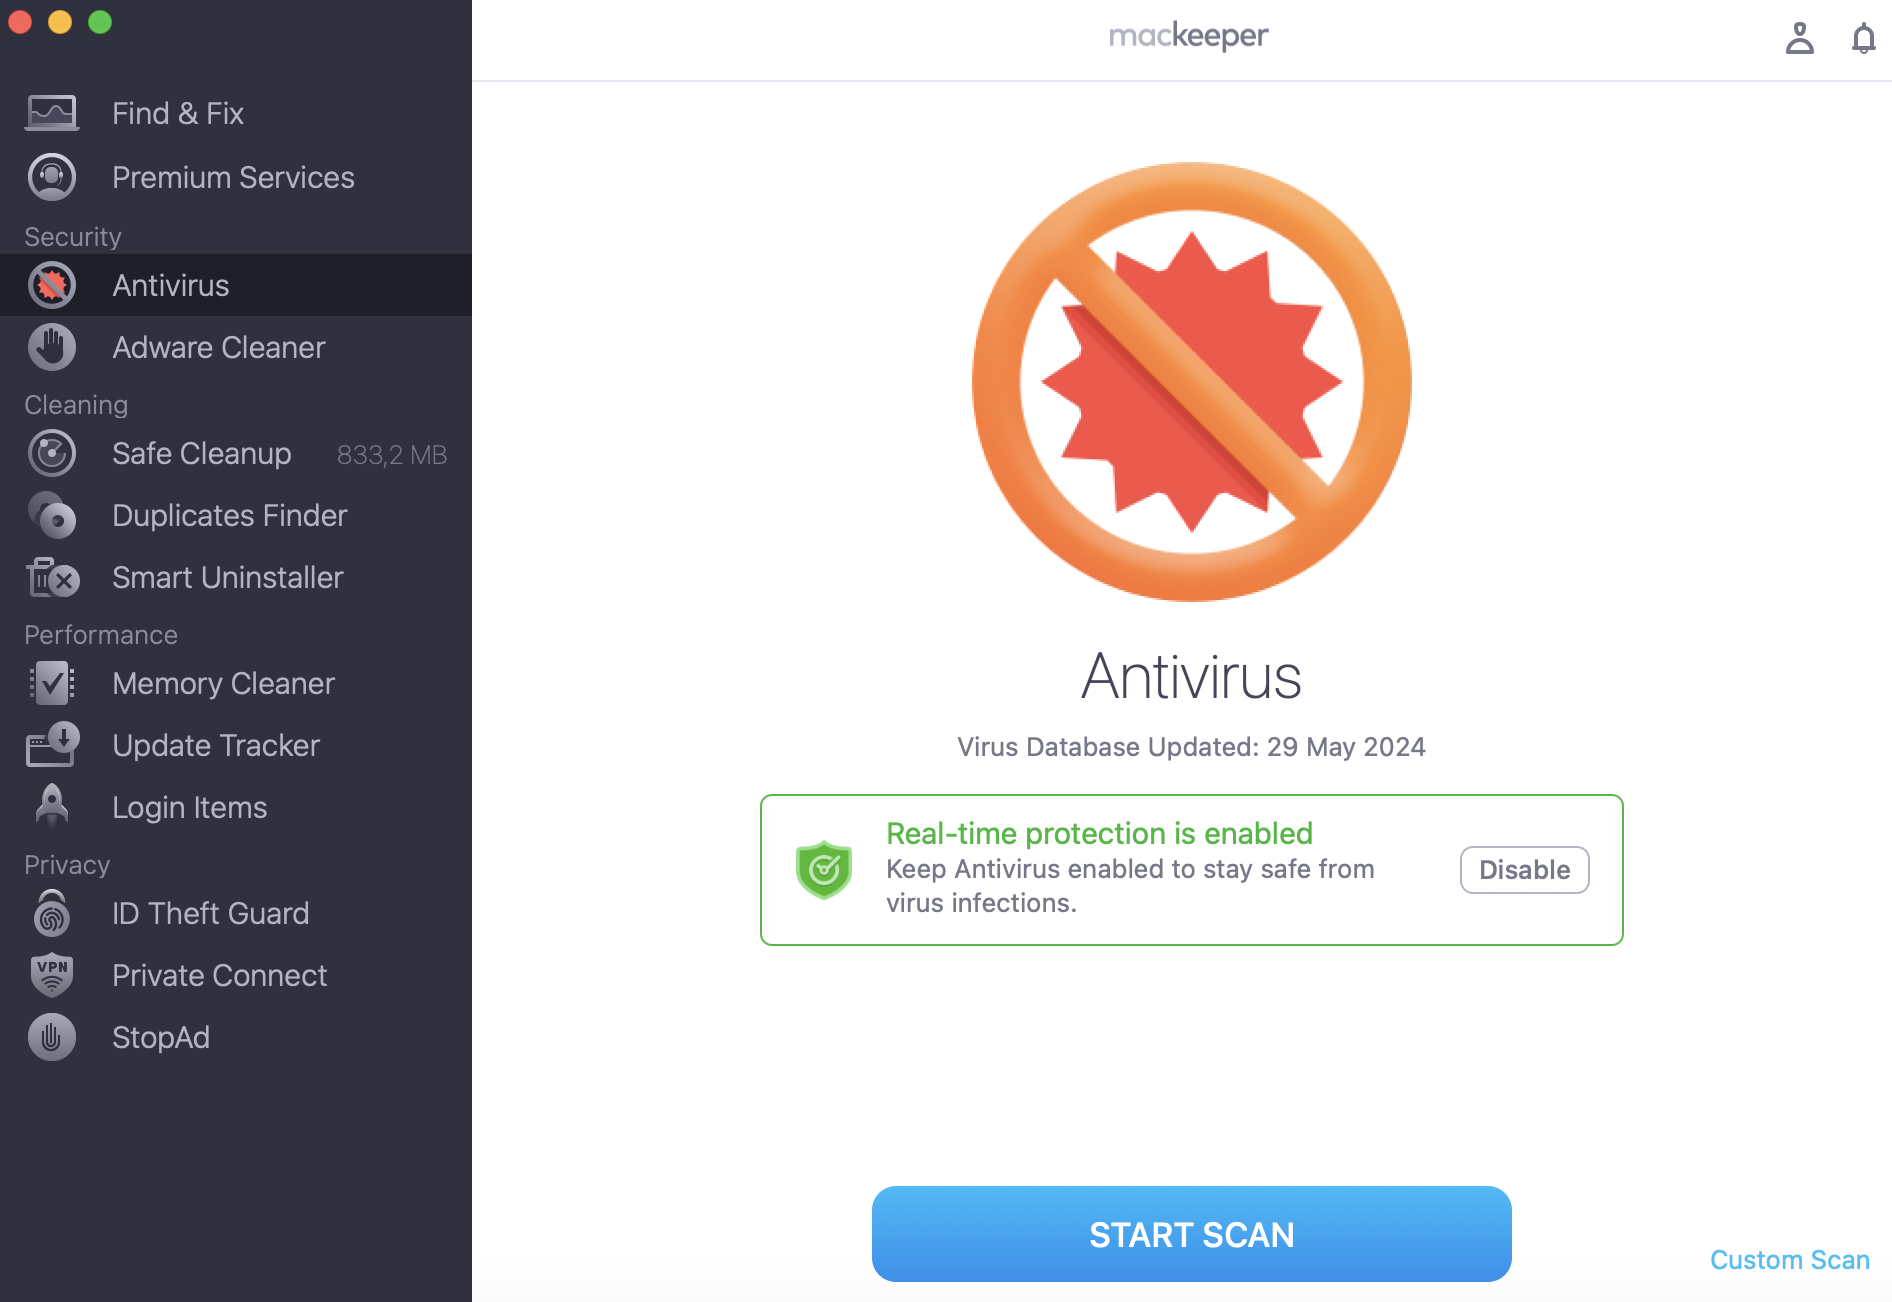 To check your Mac OS Sonoma for viruses with MacKeeper, open this app, choose Antivirus on the left, and start Scan.